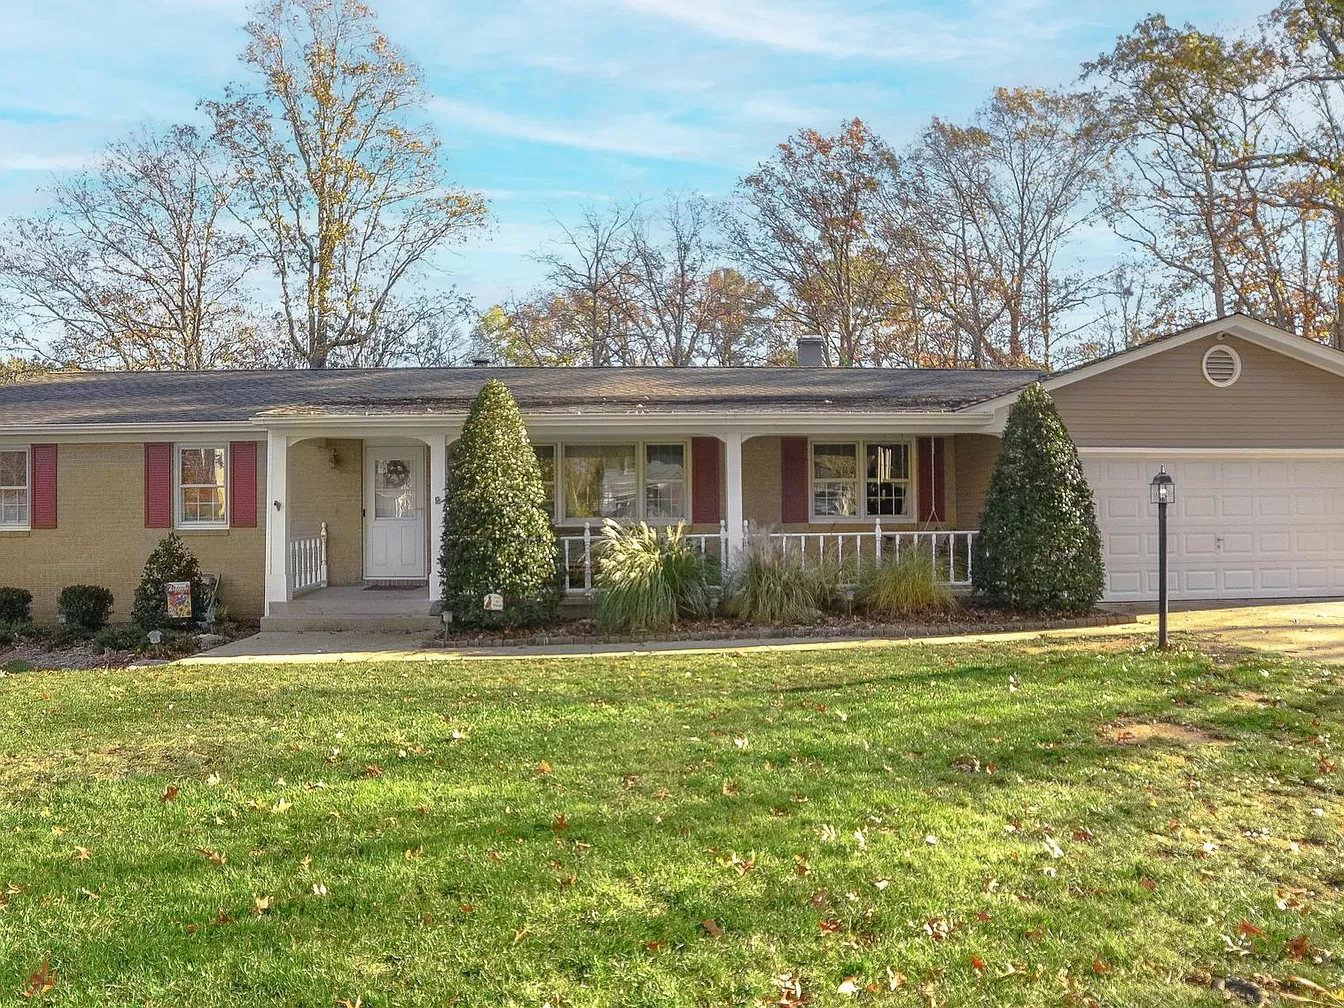 45902 Church Dr, Great Mills, MD 20634 | Zillow